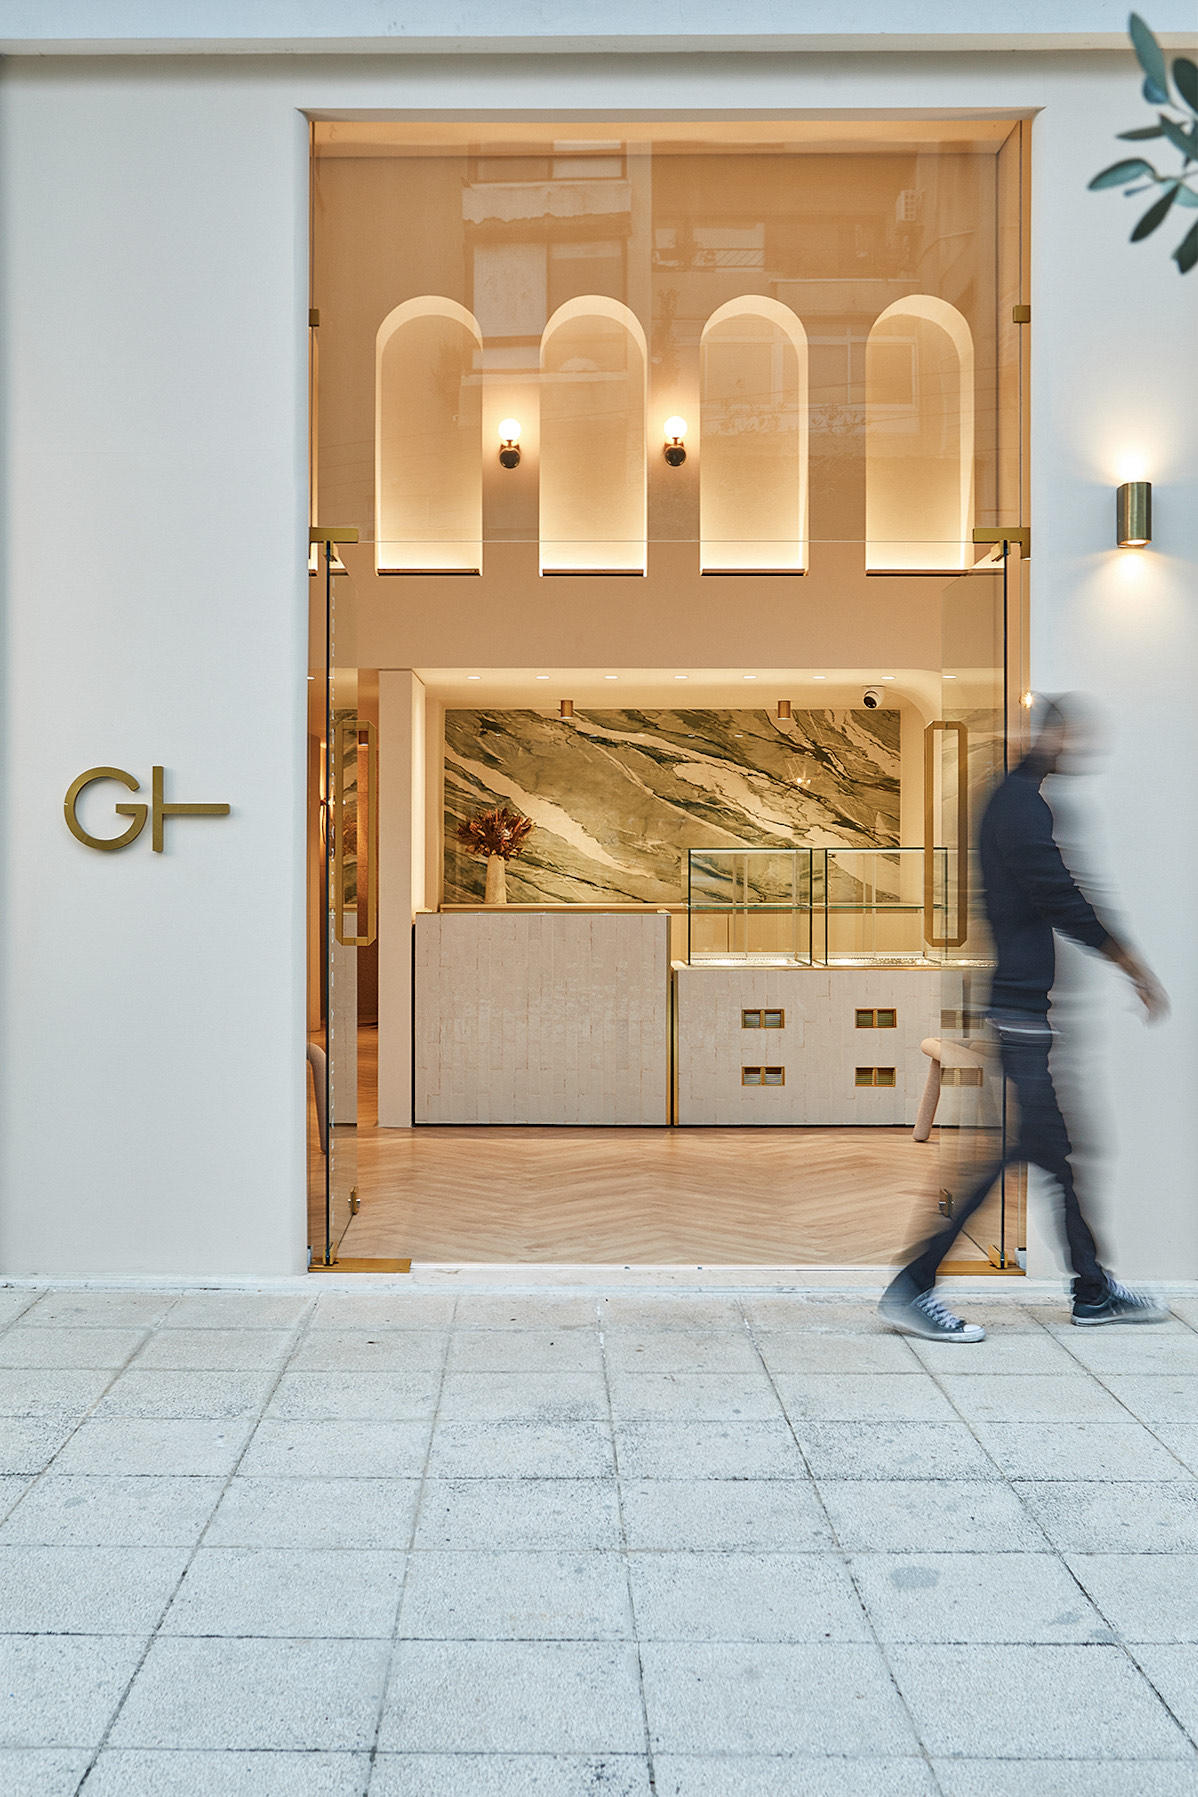 GT Health Foodshop – Designed by STUDIOADCH - Archisearch